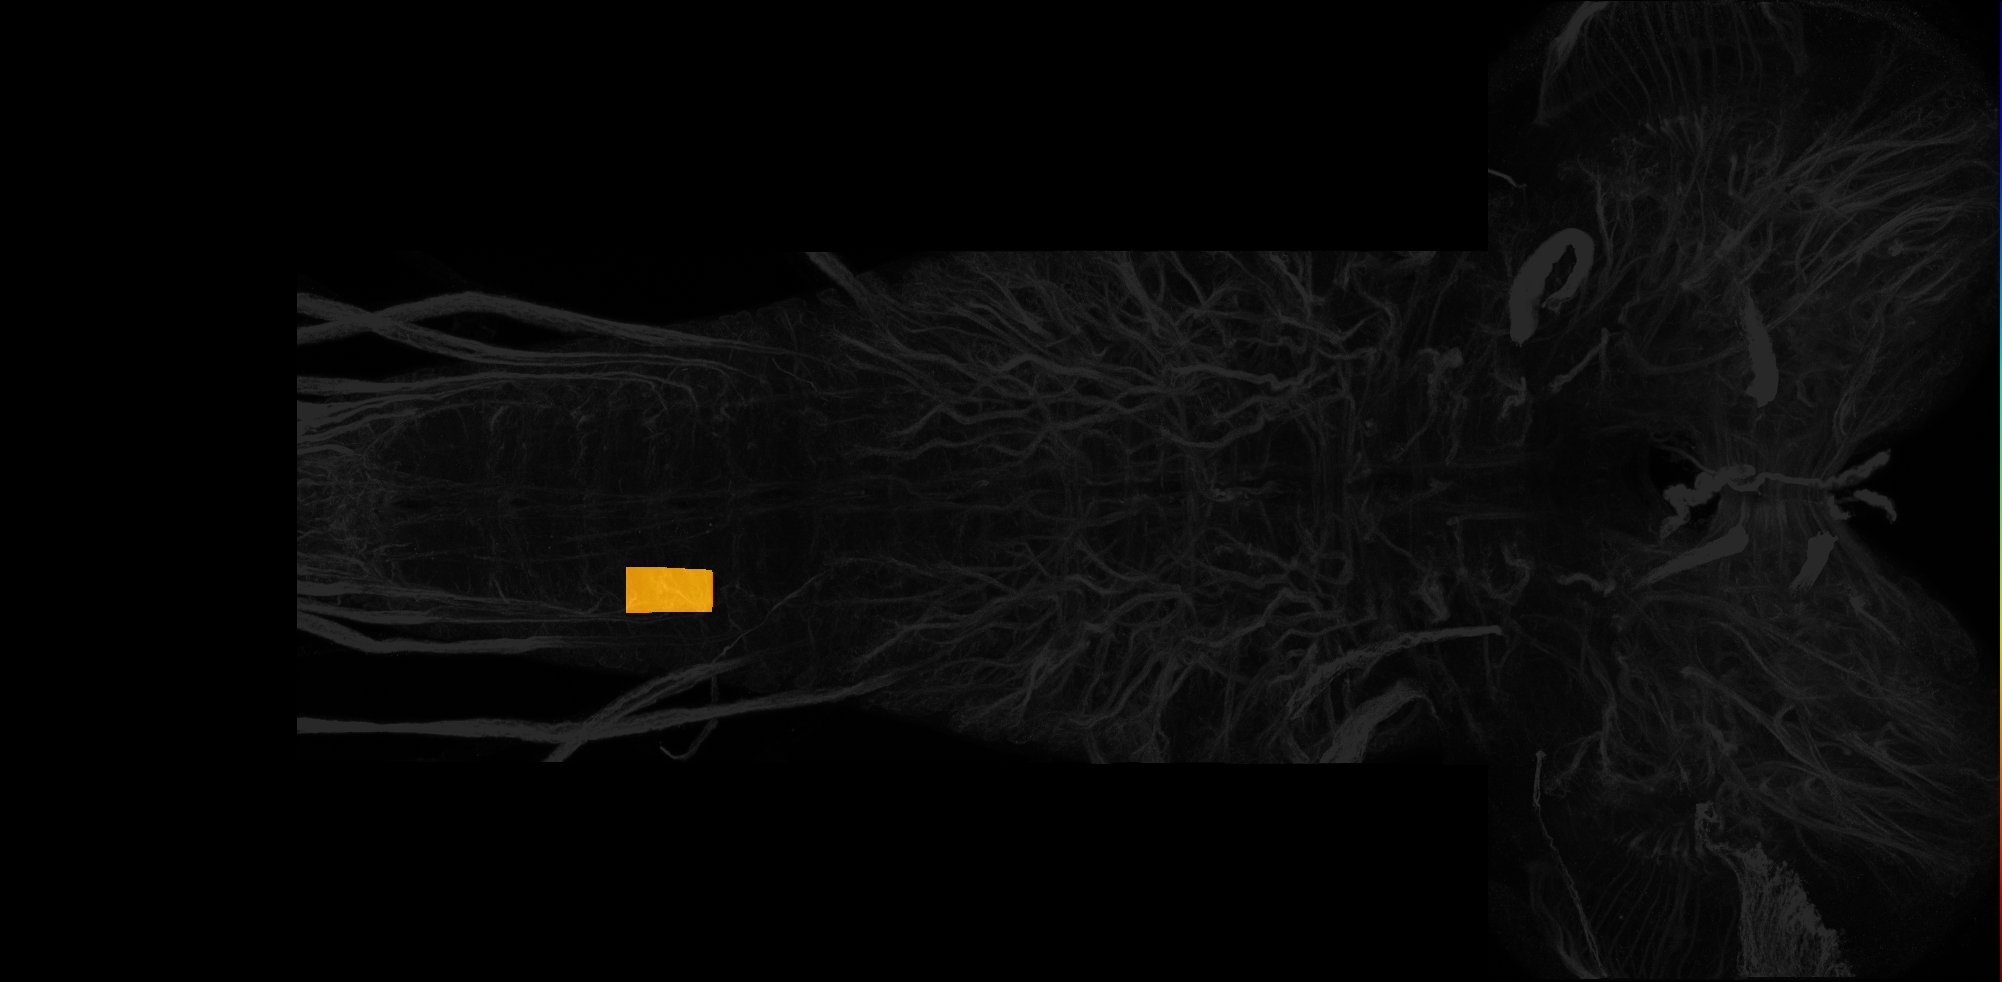 right centrolateral neuropil of A5 on L3 CNS template, Wood2018